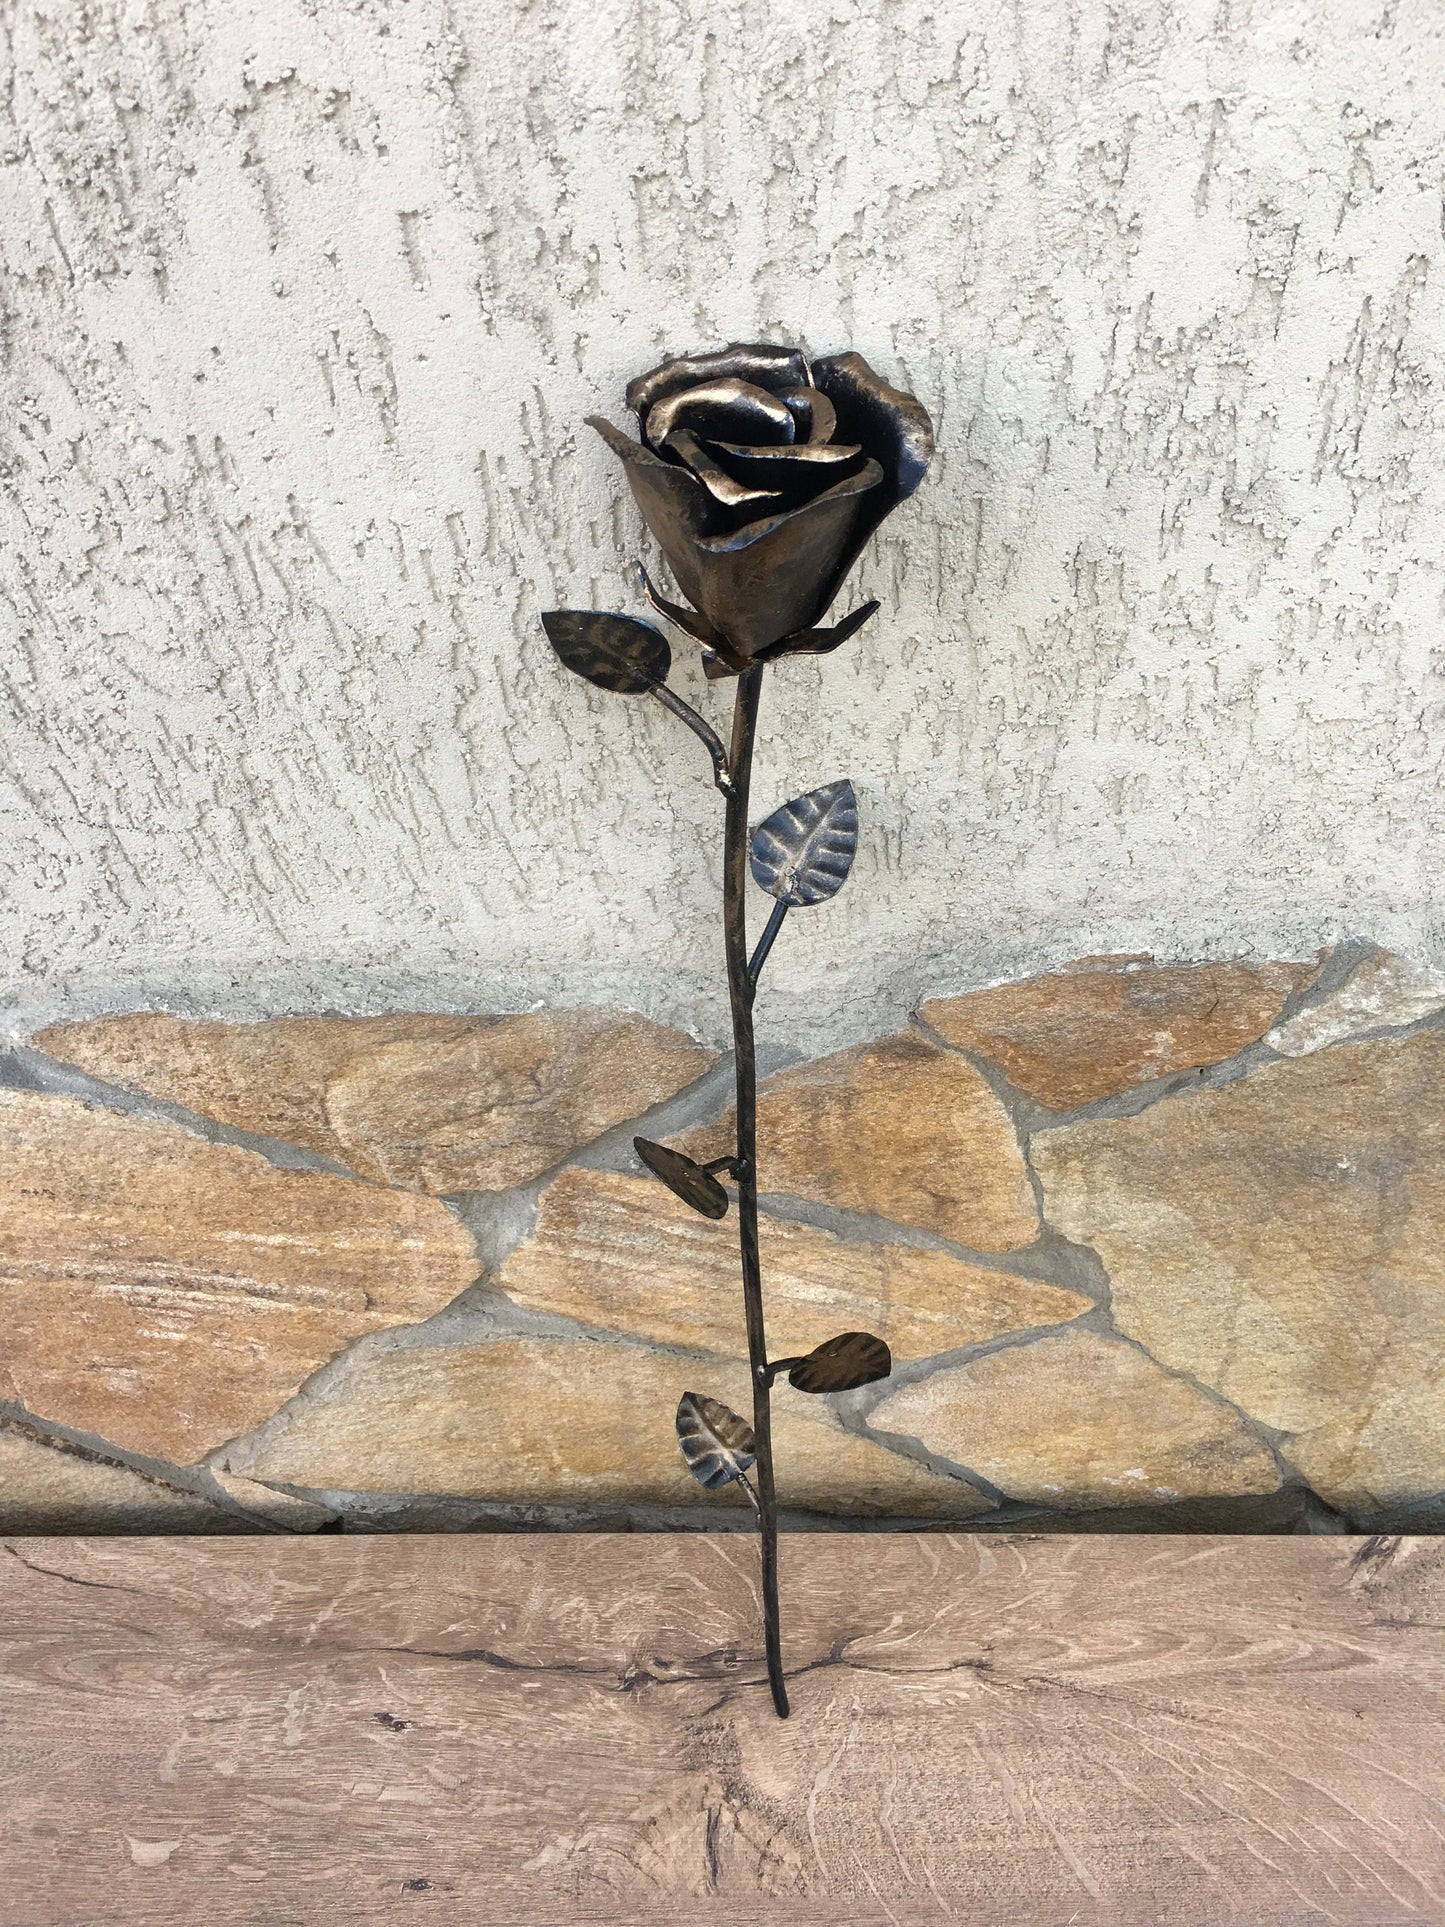 Iron rose, steel rose, metal rose, forged flower, metal bouquet, iron gifts, iron anniversary gift for her, steel anniversary gift, forged